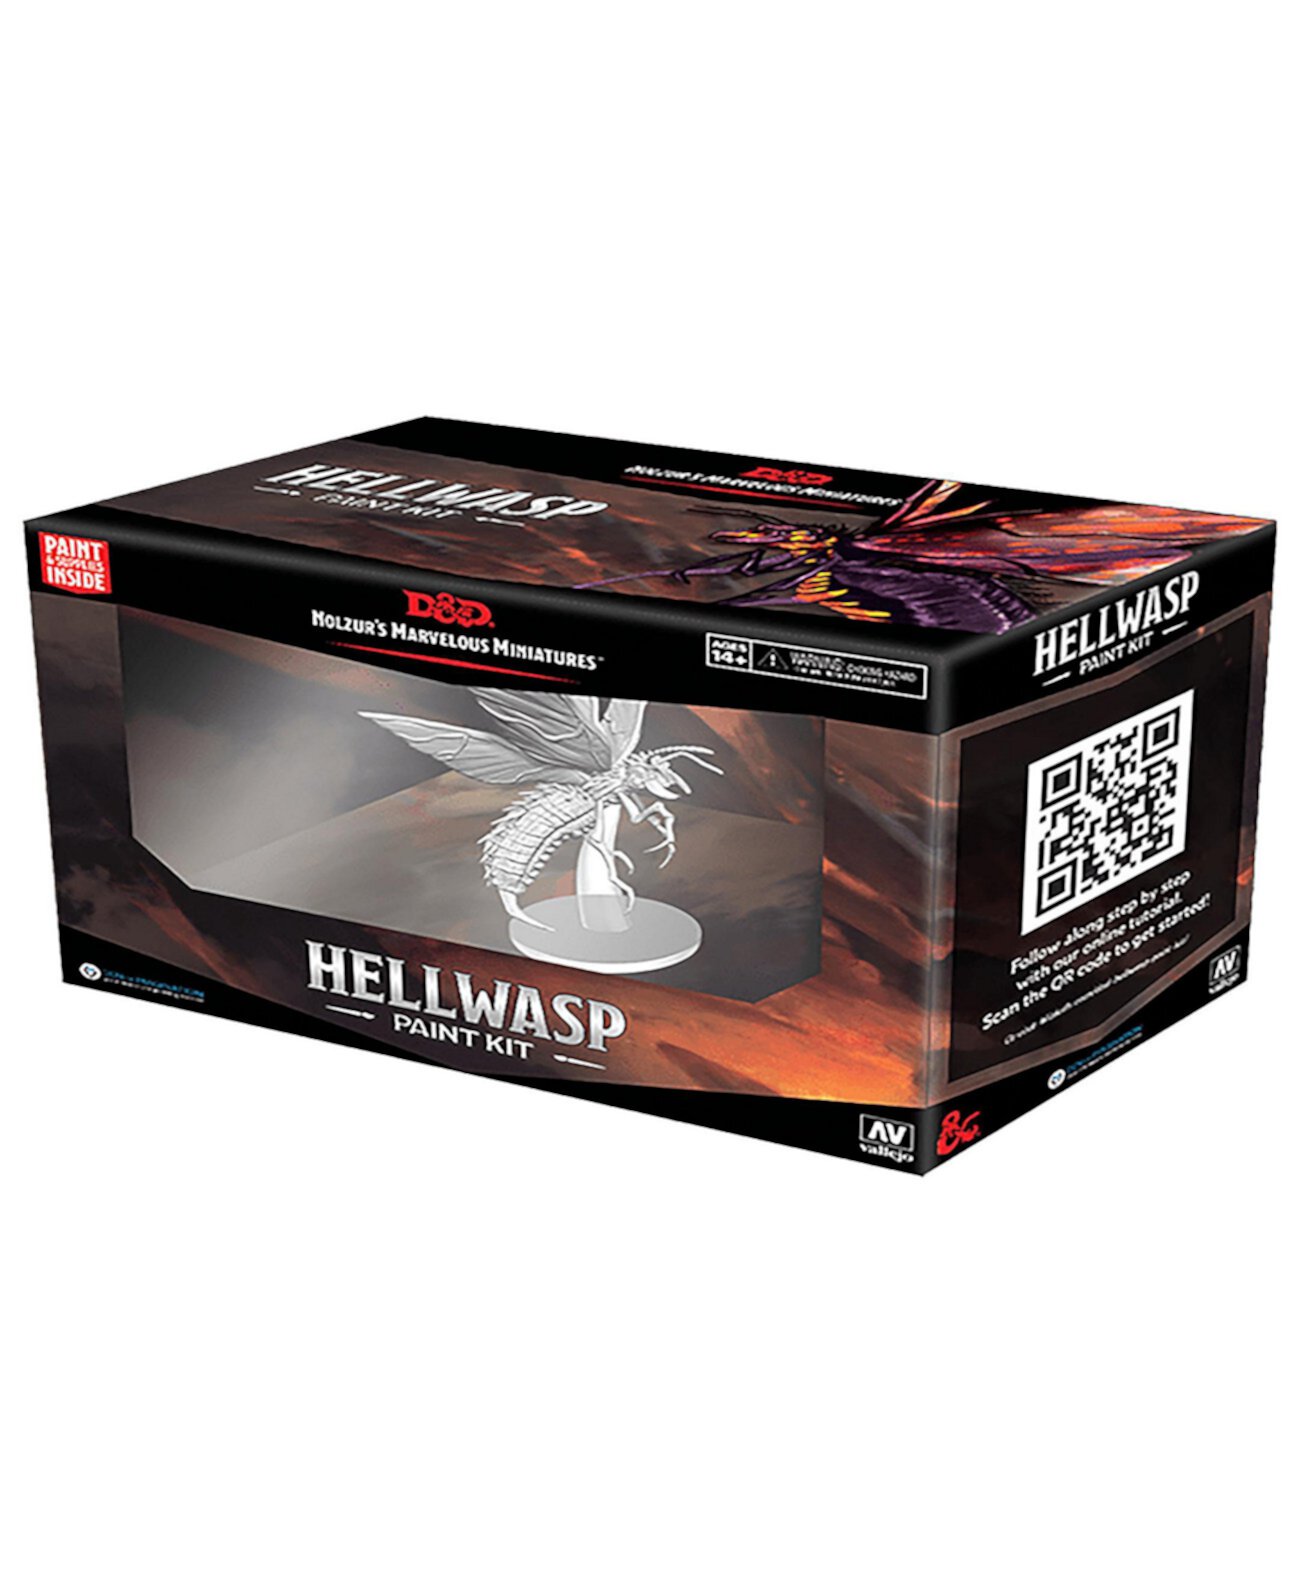 Dungeons and Dragons Чудесные миниатюры Nolzur's Hellwasp Paint Kit All in One Set, 12 шт. WizKids Games